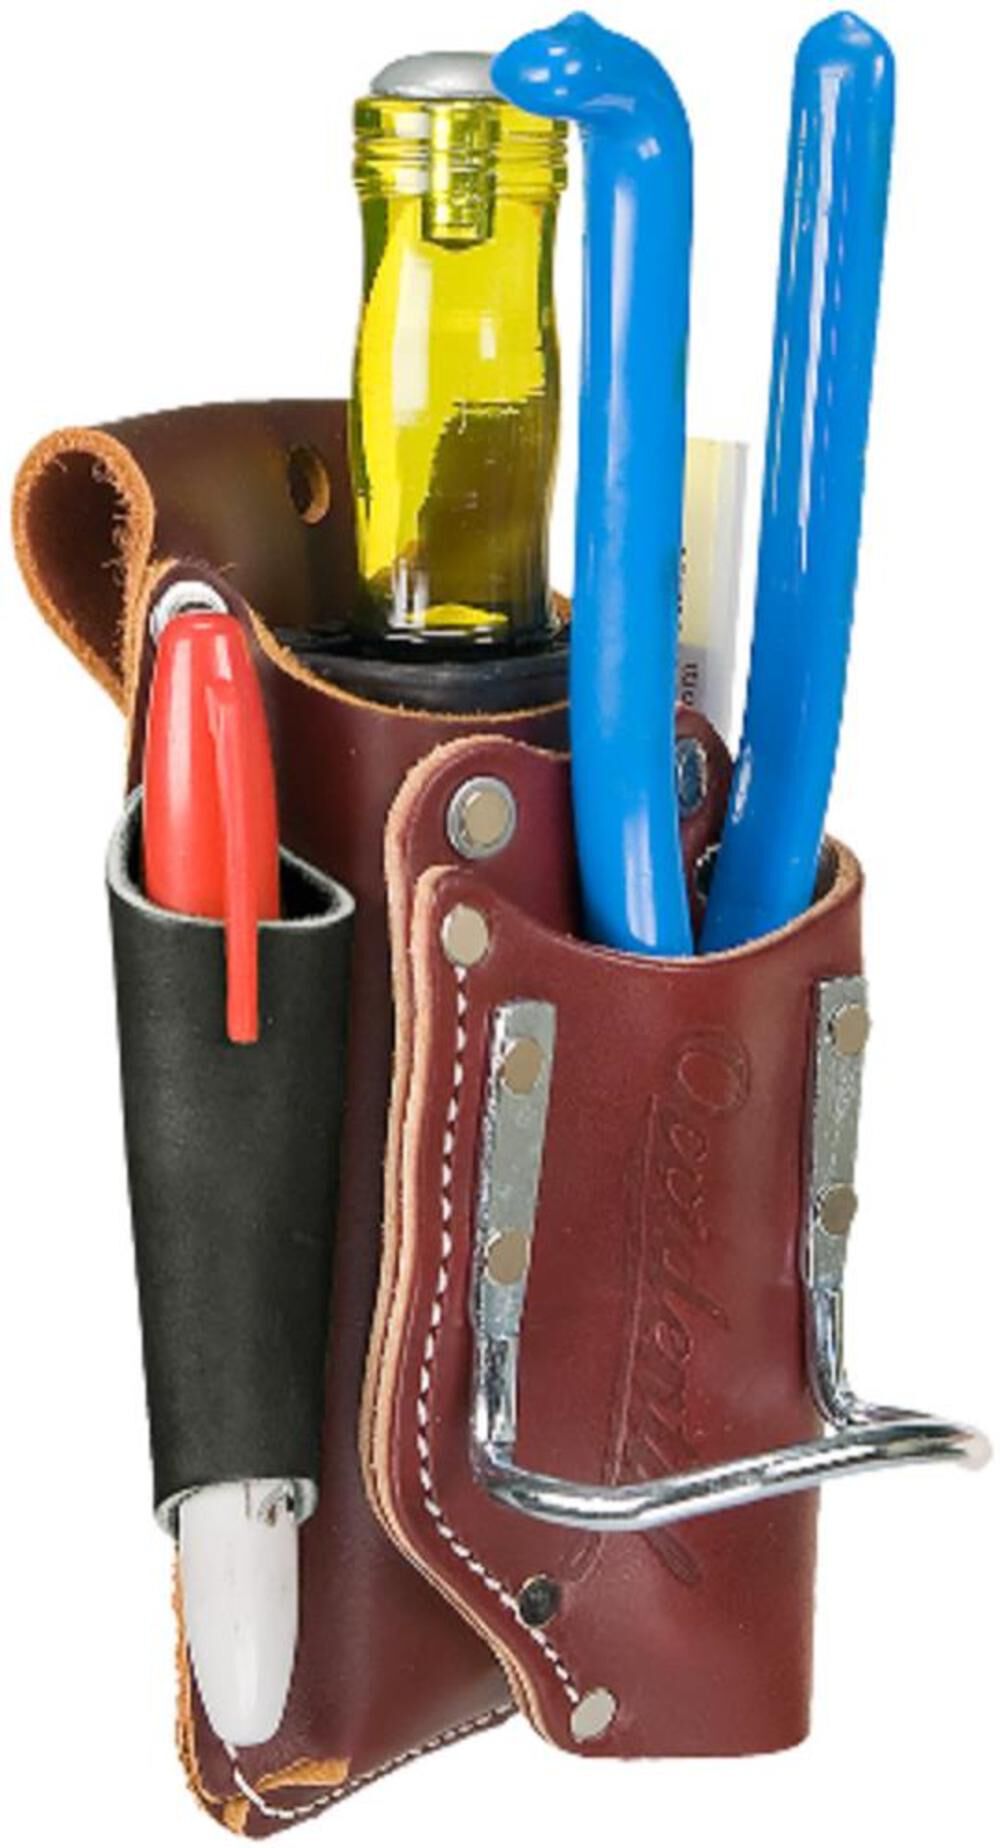 Leather Belt Worn - 5-in-1 Tool/Tape Holder 5520